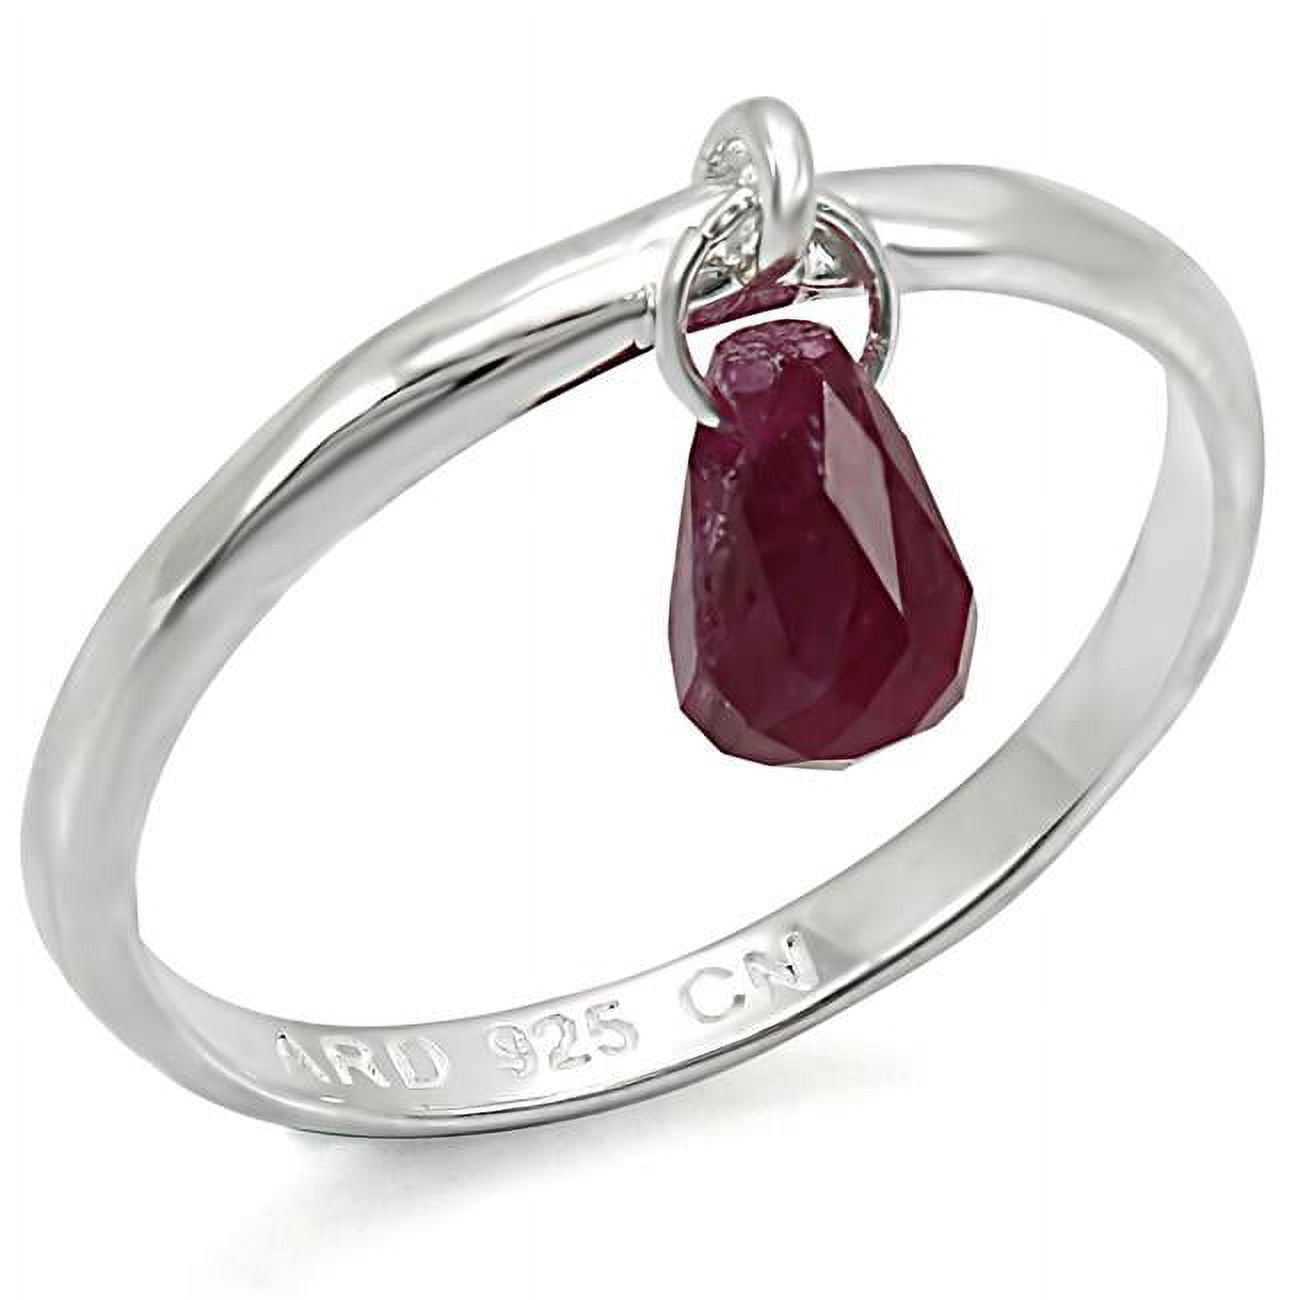 Picture of Alamode LOS324-10 Women Silver 925 Sterling Silver Ring with Genuine Stone in Ruby - Size 10